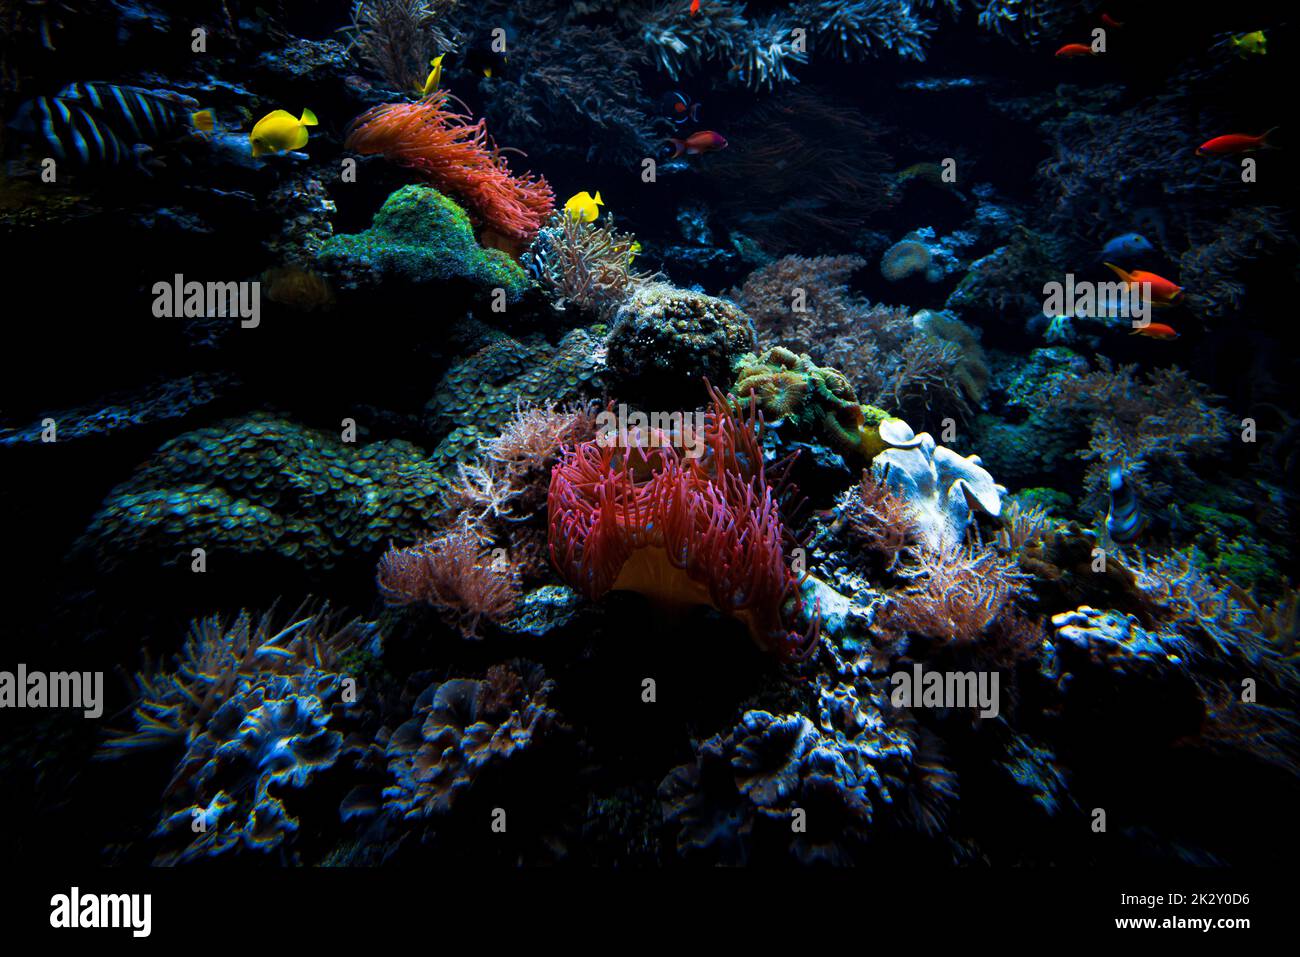 Underwater sea world. Colorful tropical fish. Life in the coral reef. Ecosystem. Stock Photo